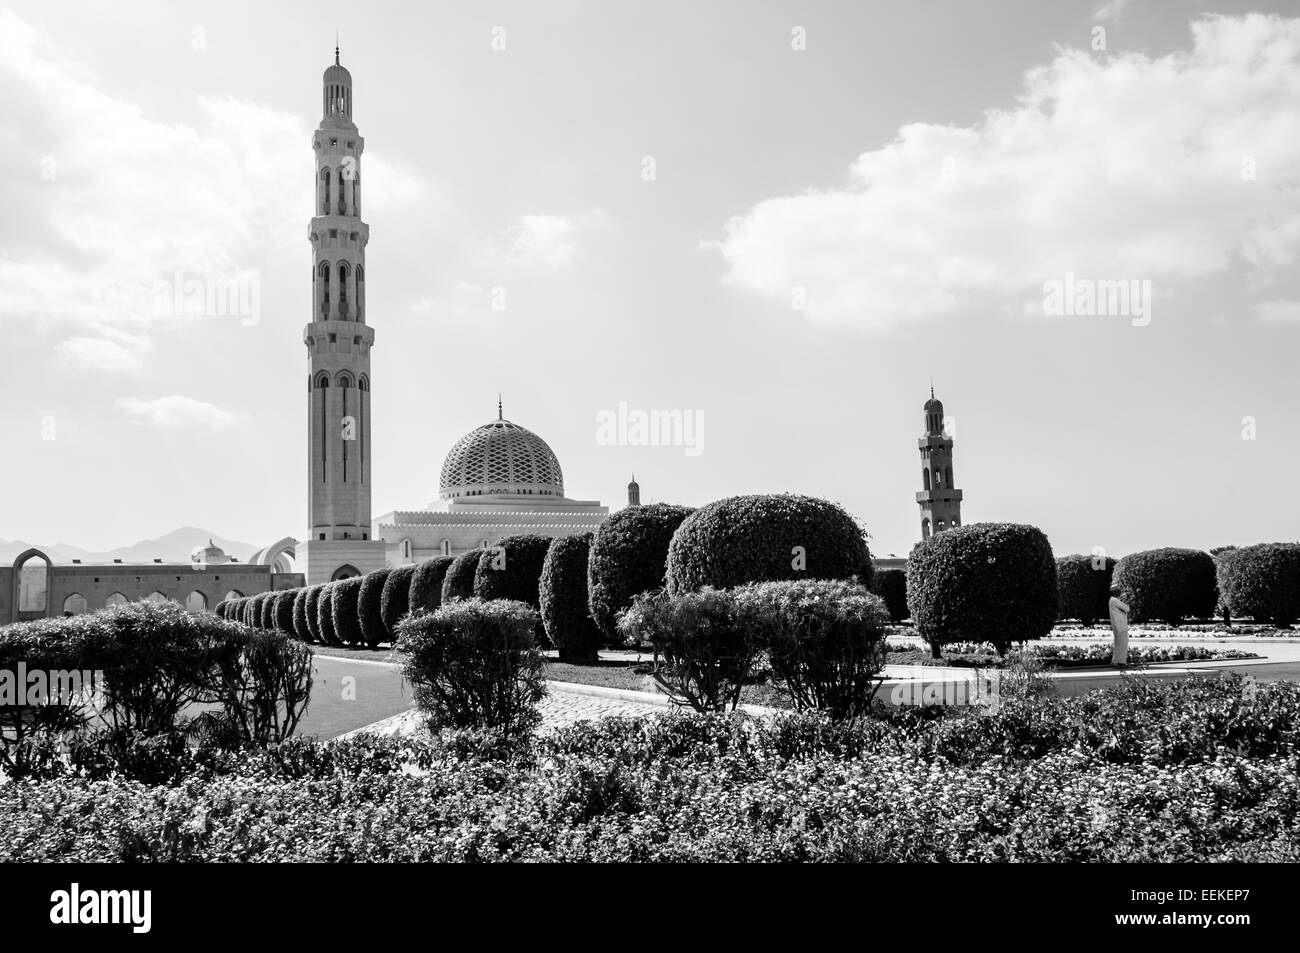 Sultan Qaboos Grand Mosque, desaturated view, Muscat, Oman Stock Photo